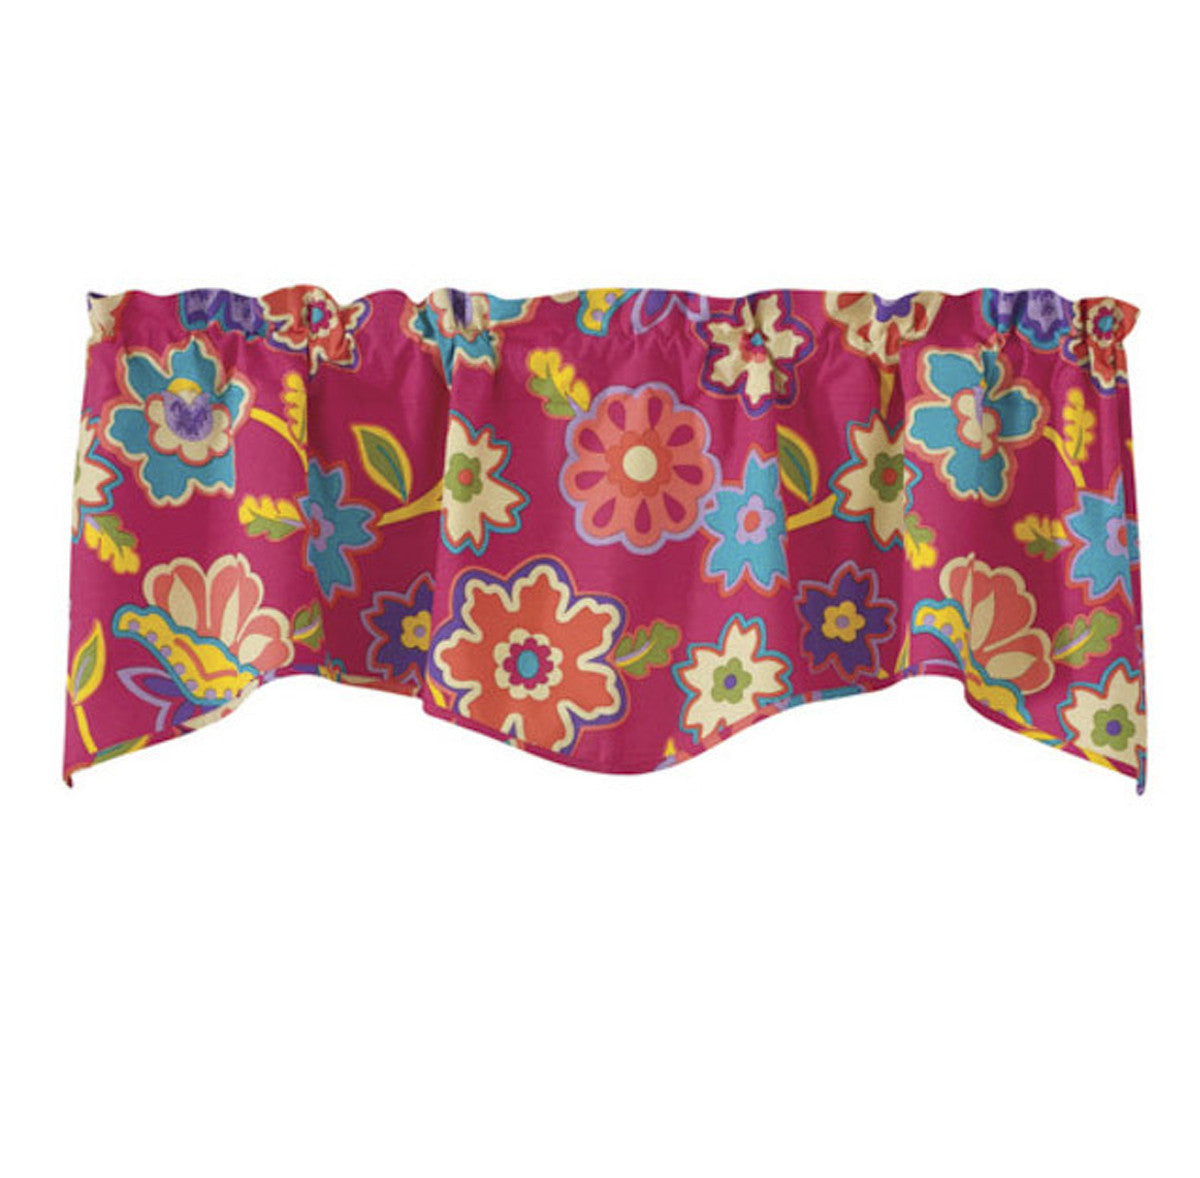 Patio Party Lined Wave Curtain Valance 58" x 18"